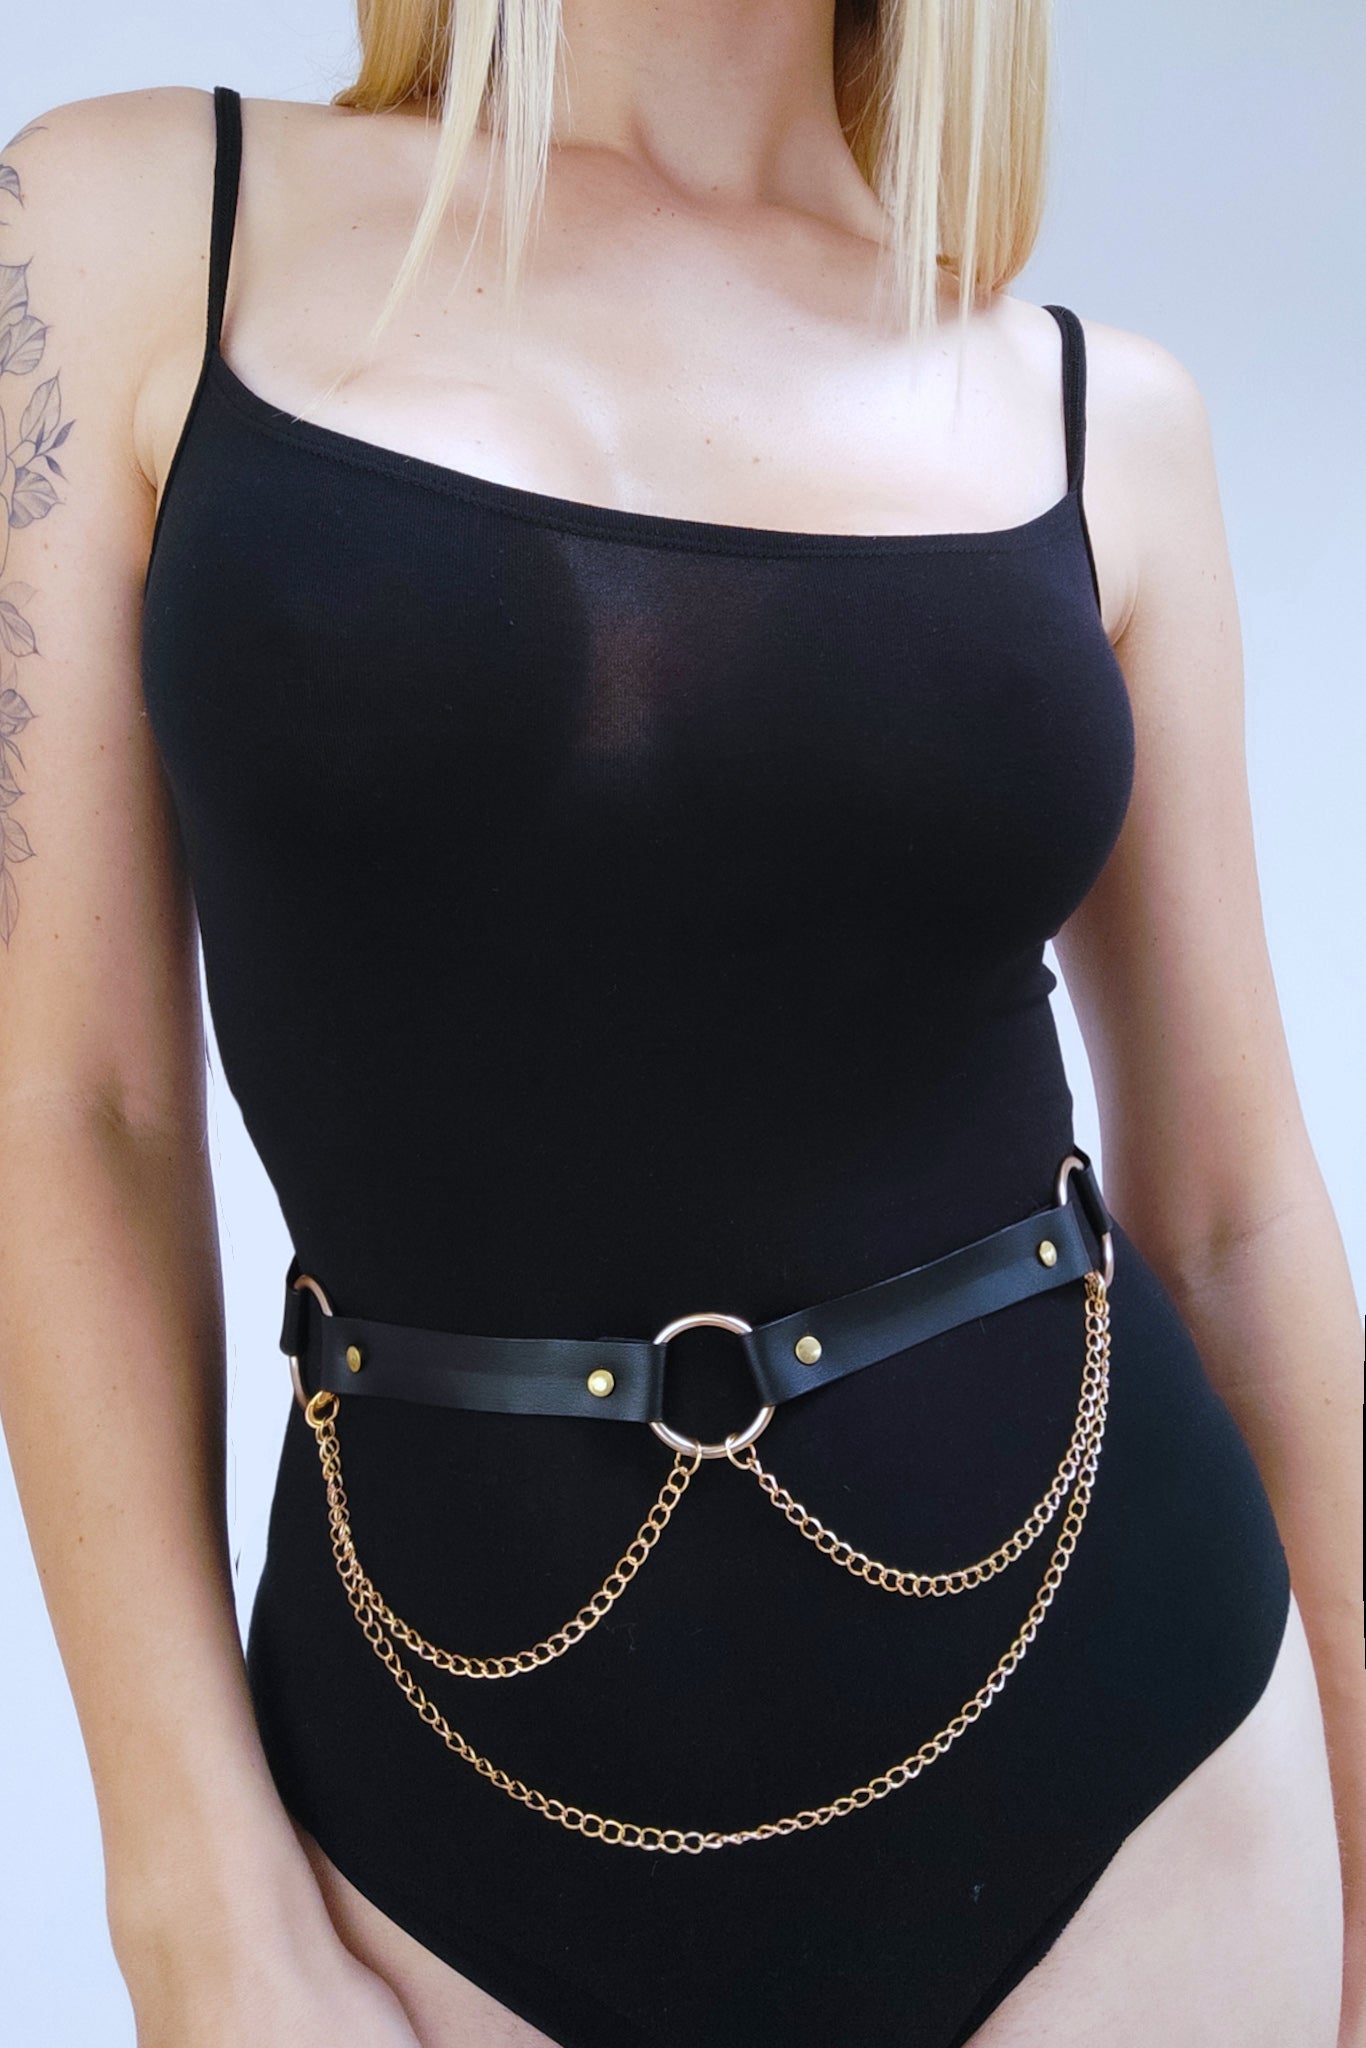 Leather Waist Belt Harness with Sexy Chains No. 23